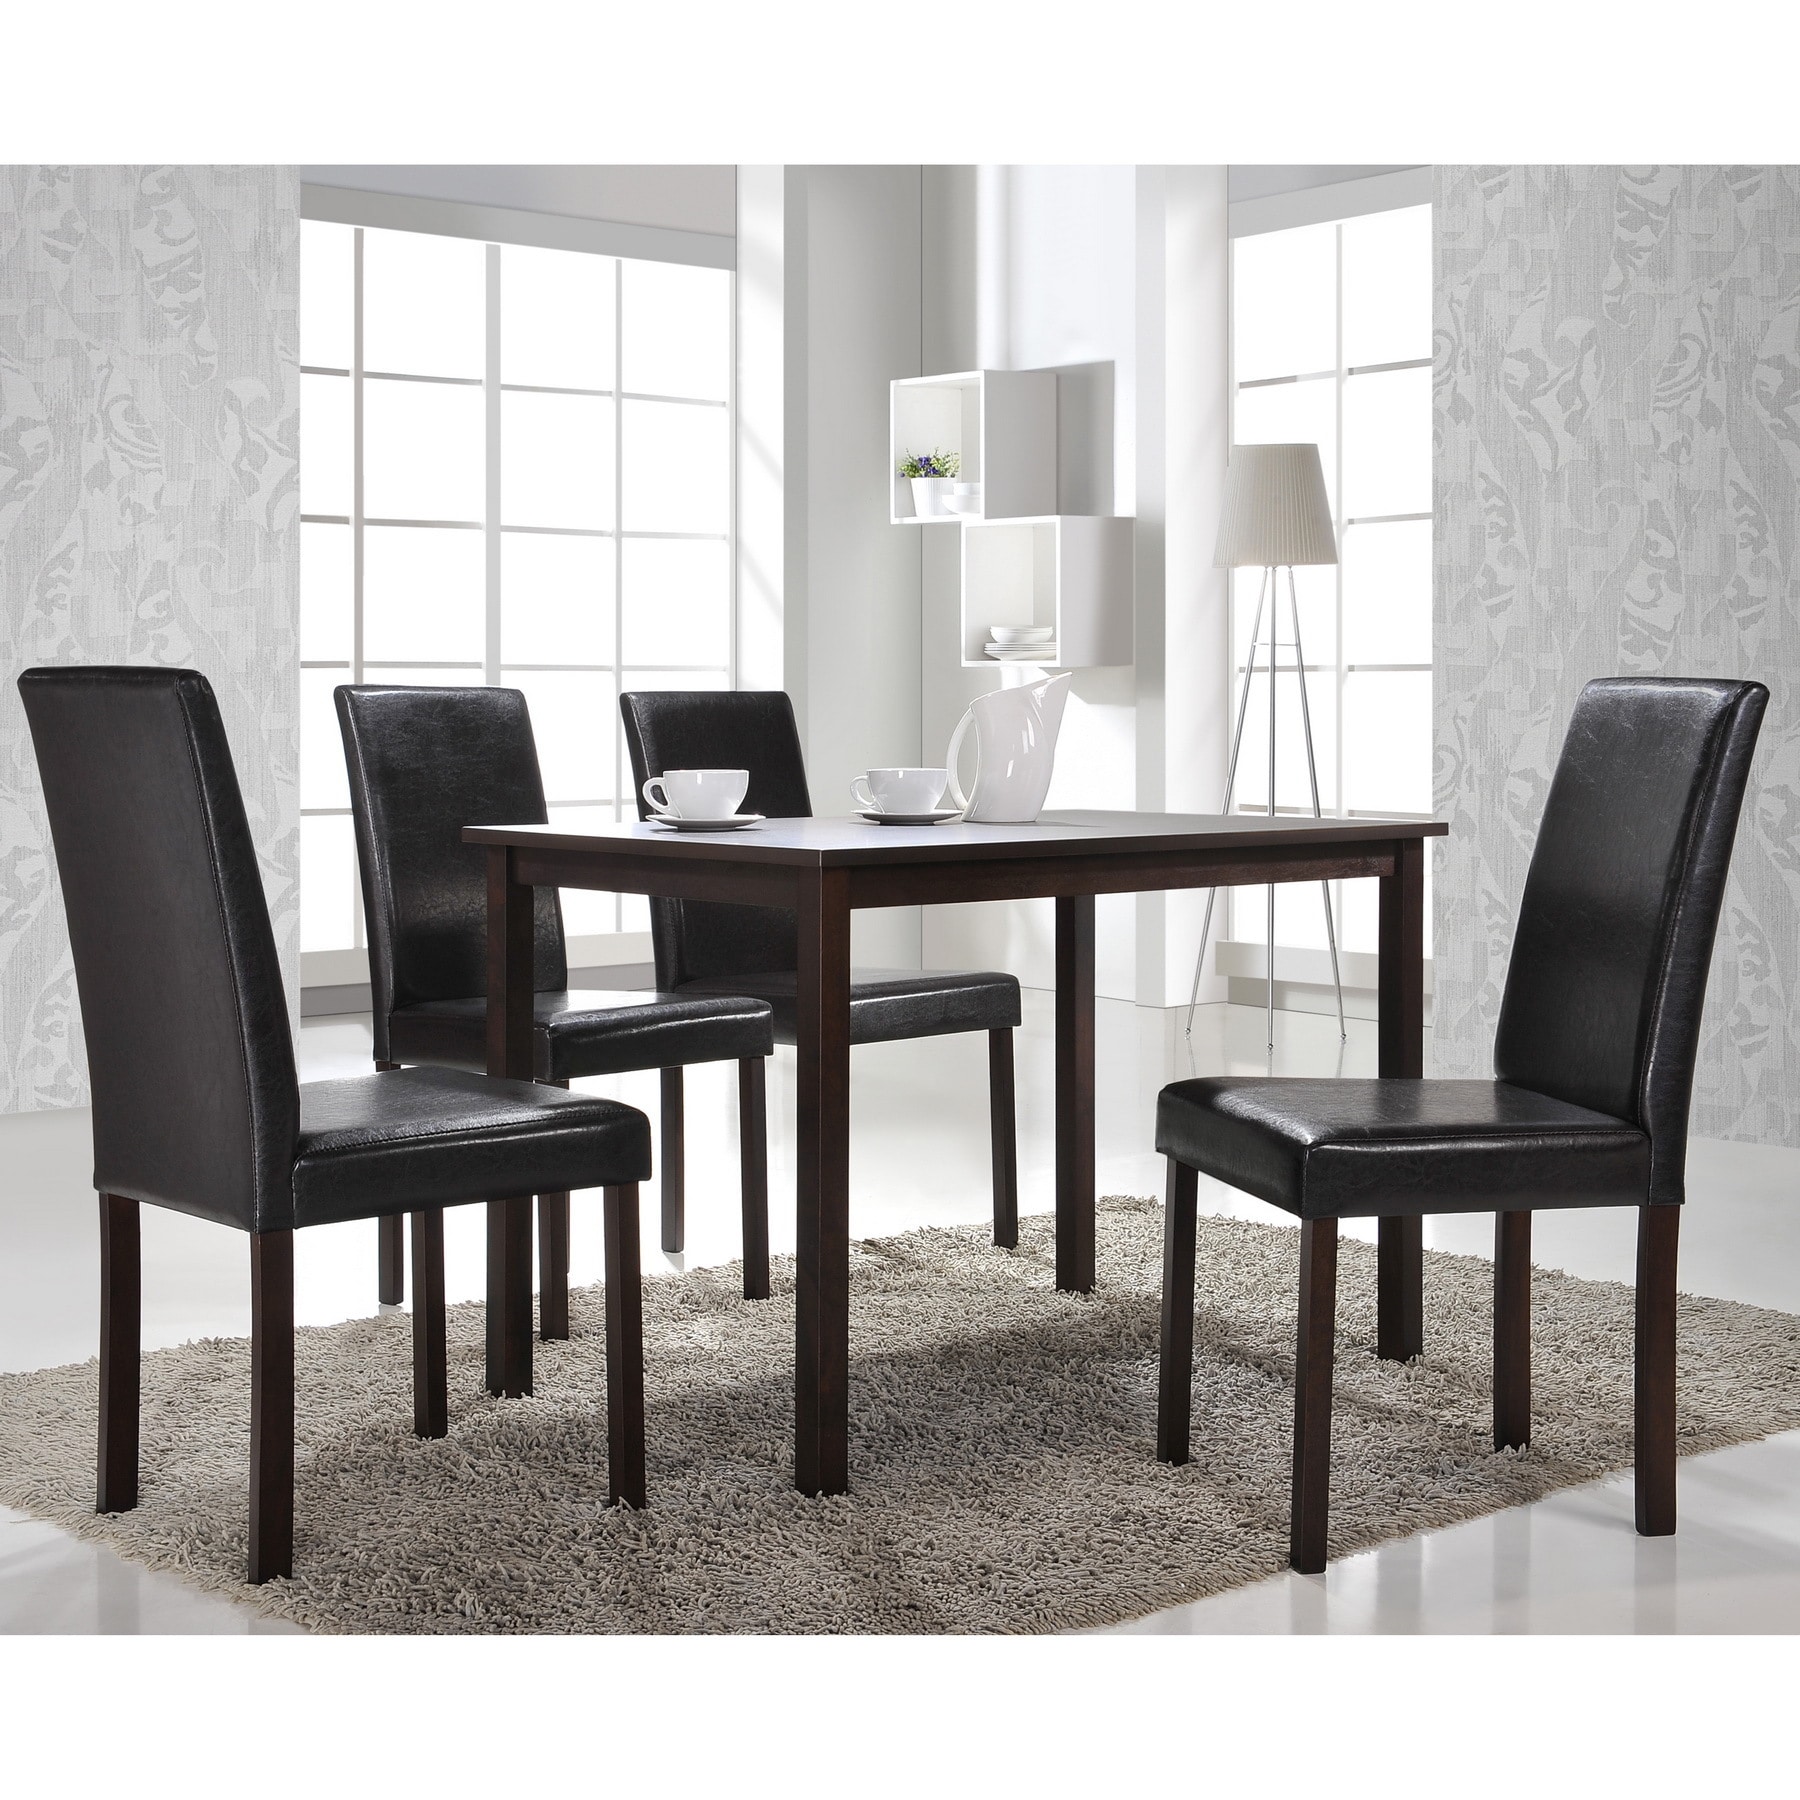 Shop Andrew Modern Dining Chairs (Set of 4) - Free Shipping On Orders